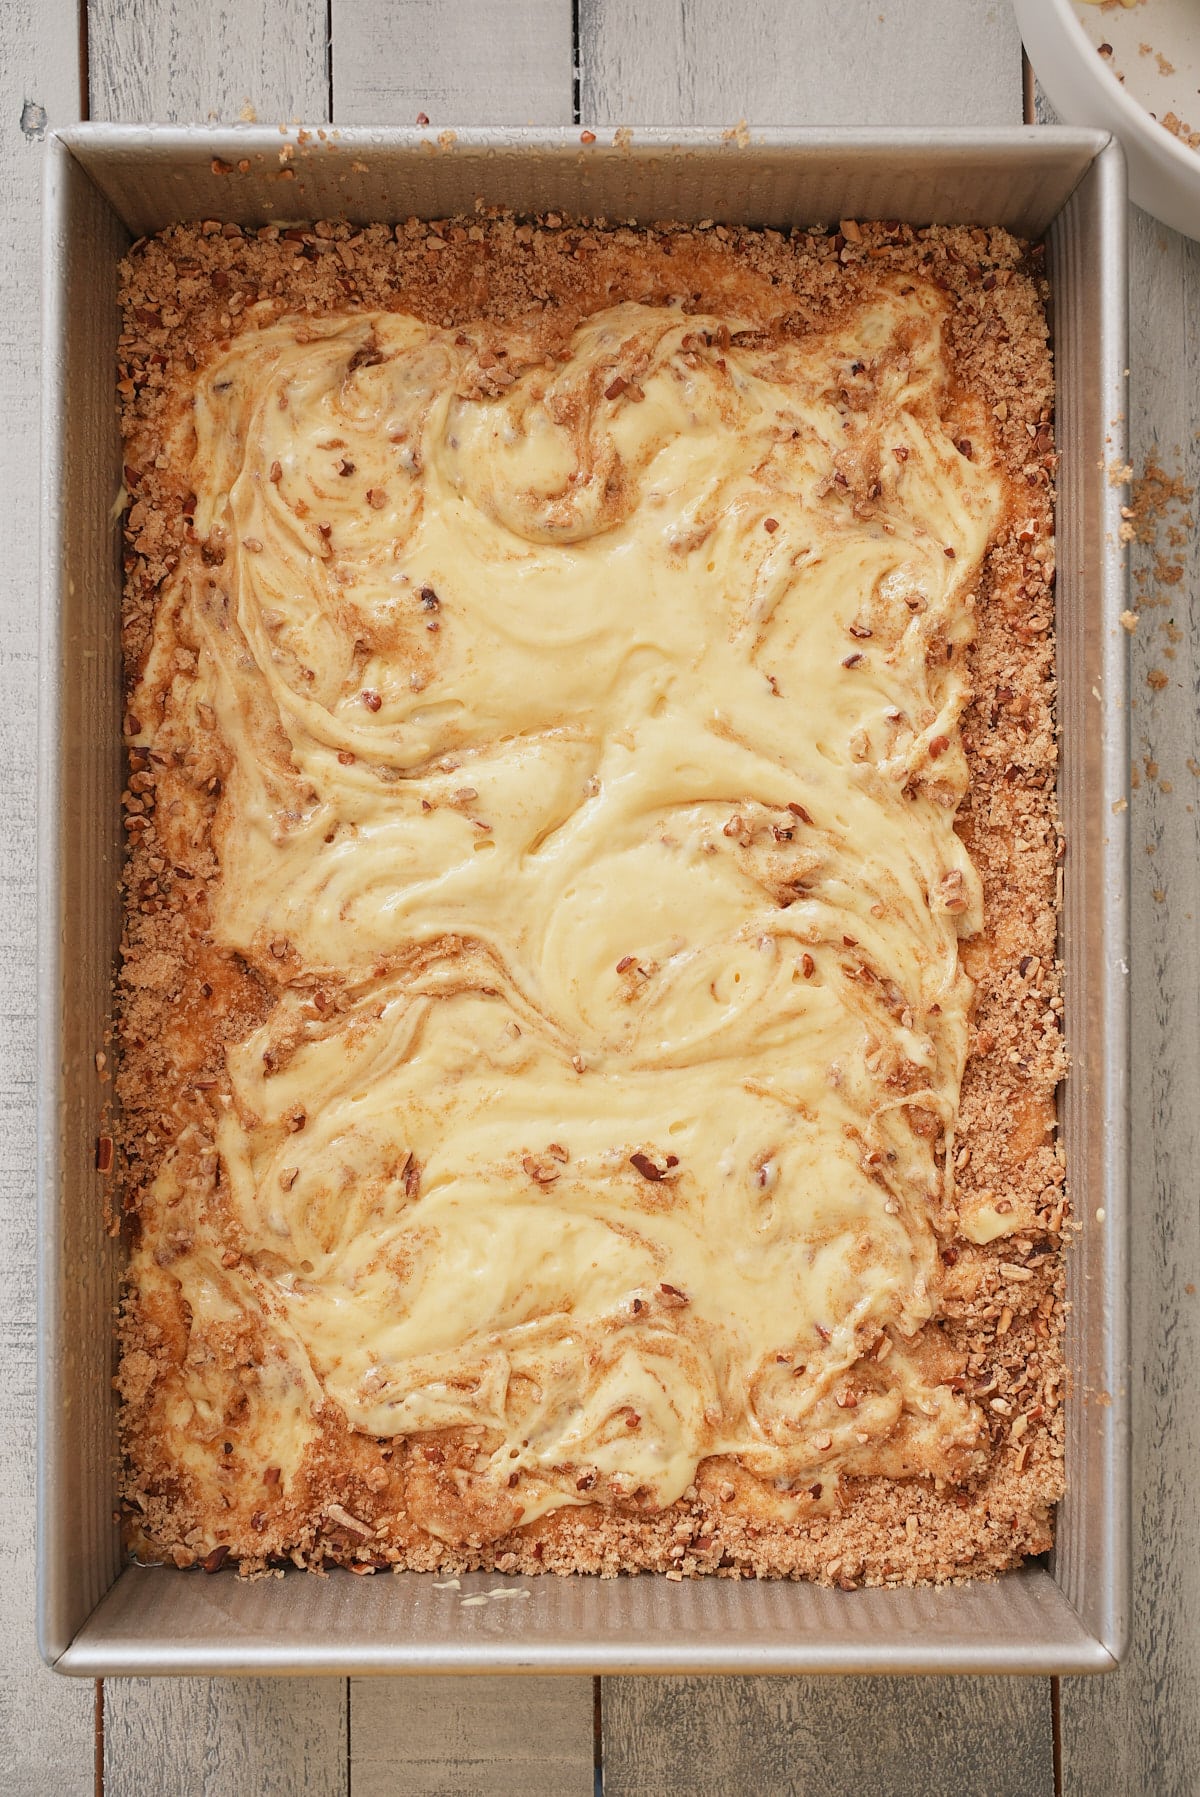 Cake mix batter and sugar and pecan crumb mixture swirled together in cake tin to form a marble effect.